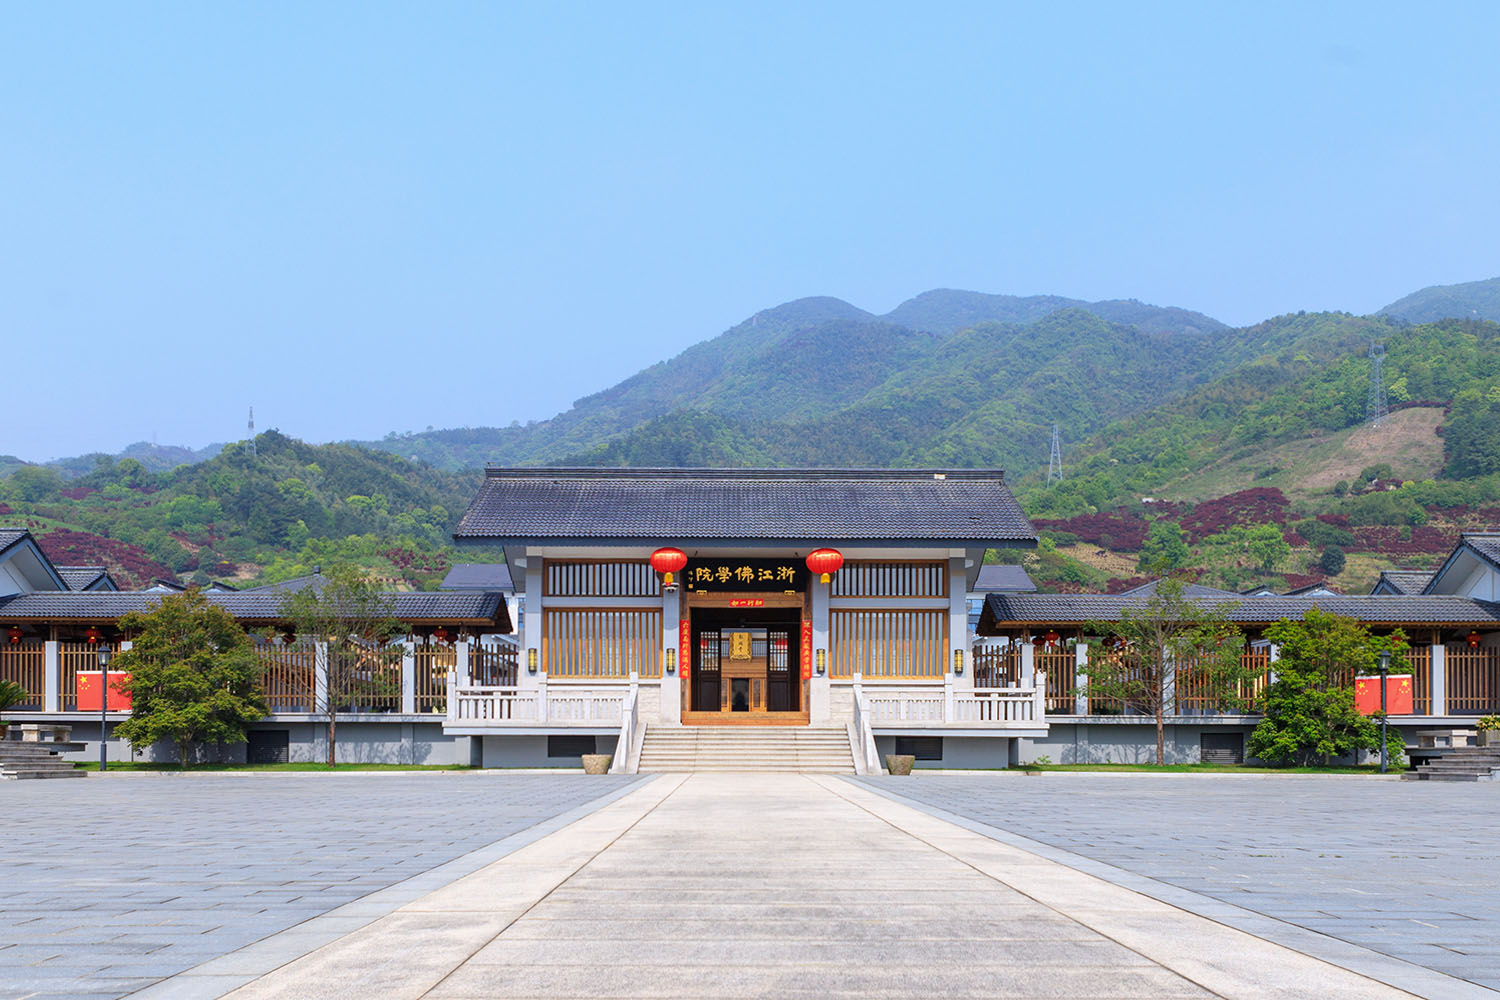  Official promotional video of Zhejiang Buddhist College (Headquarters)